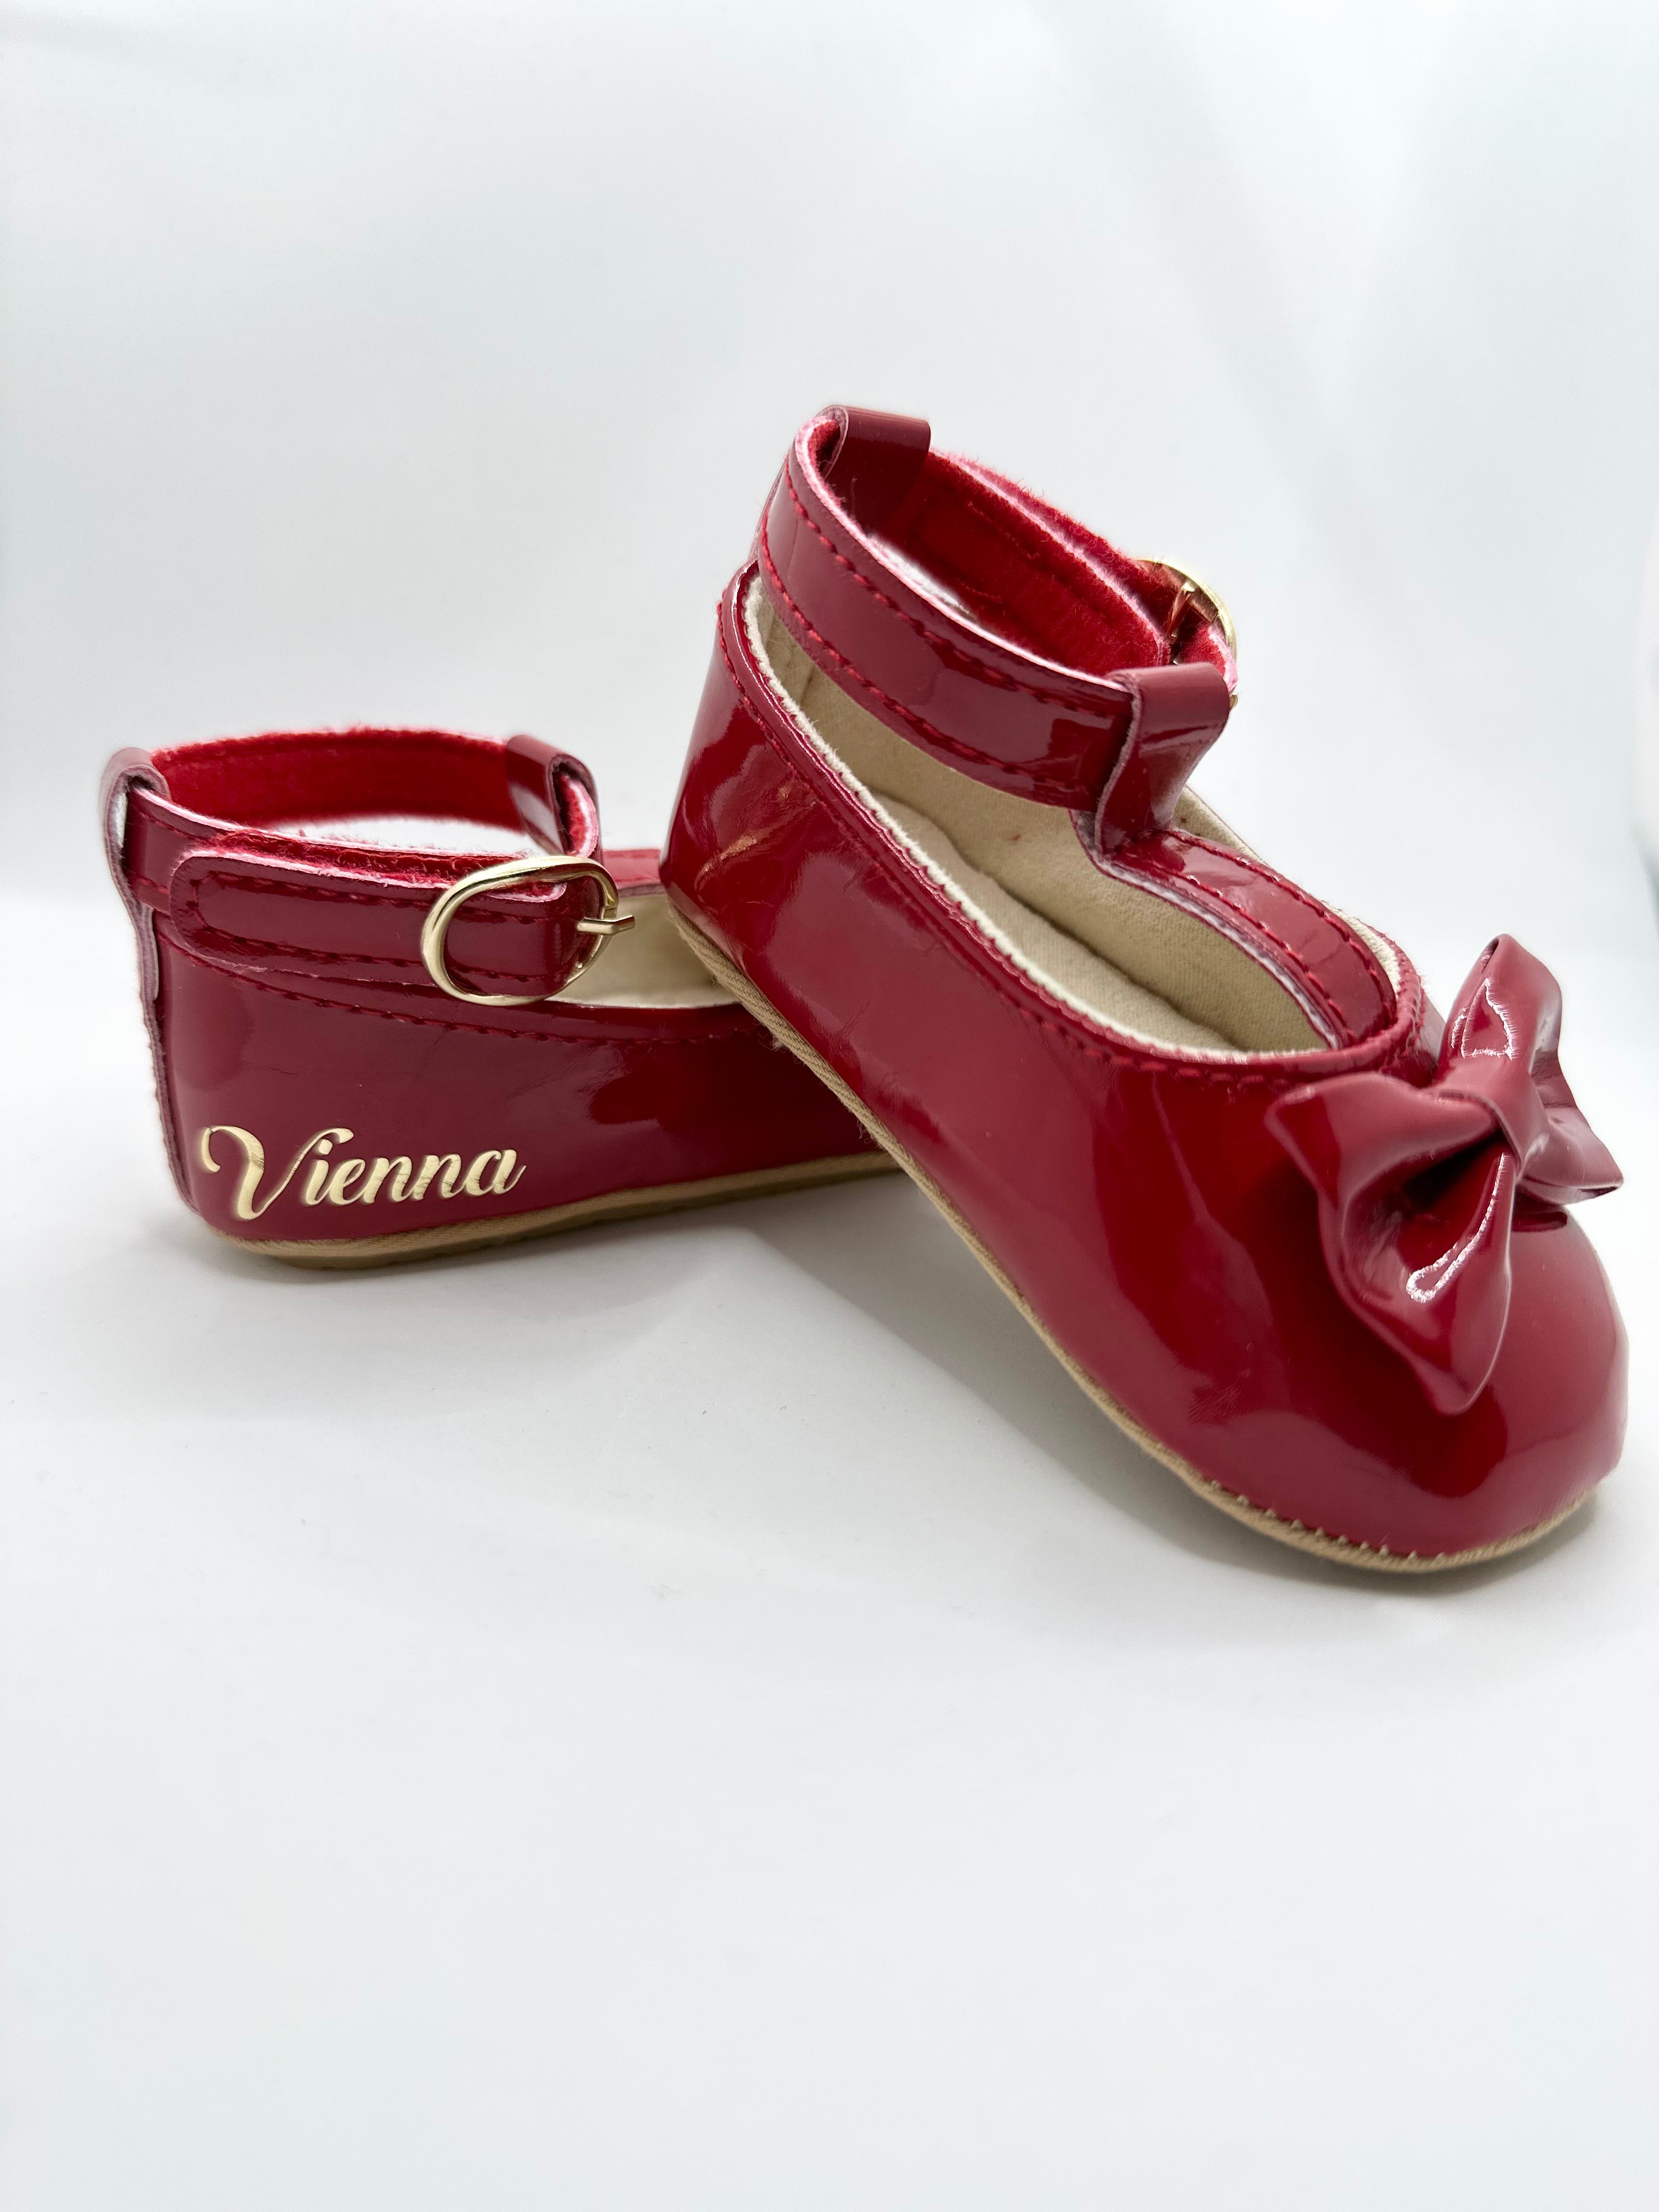 Bella Patent Shoes - Pink